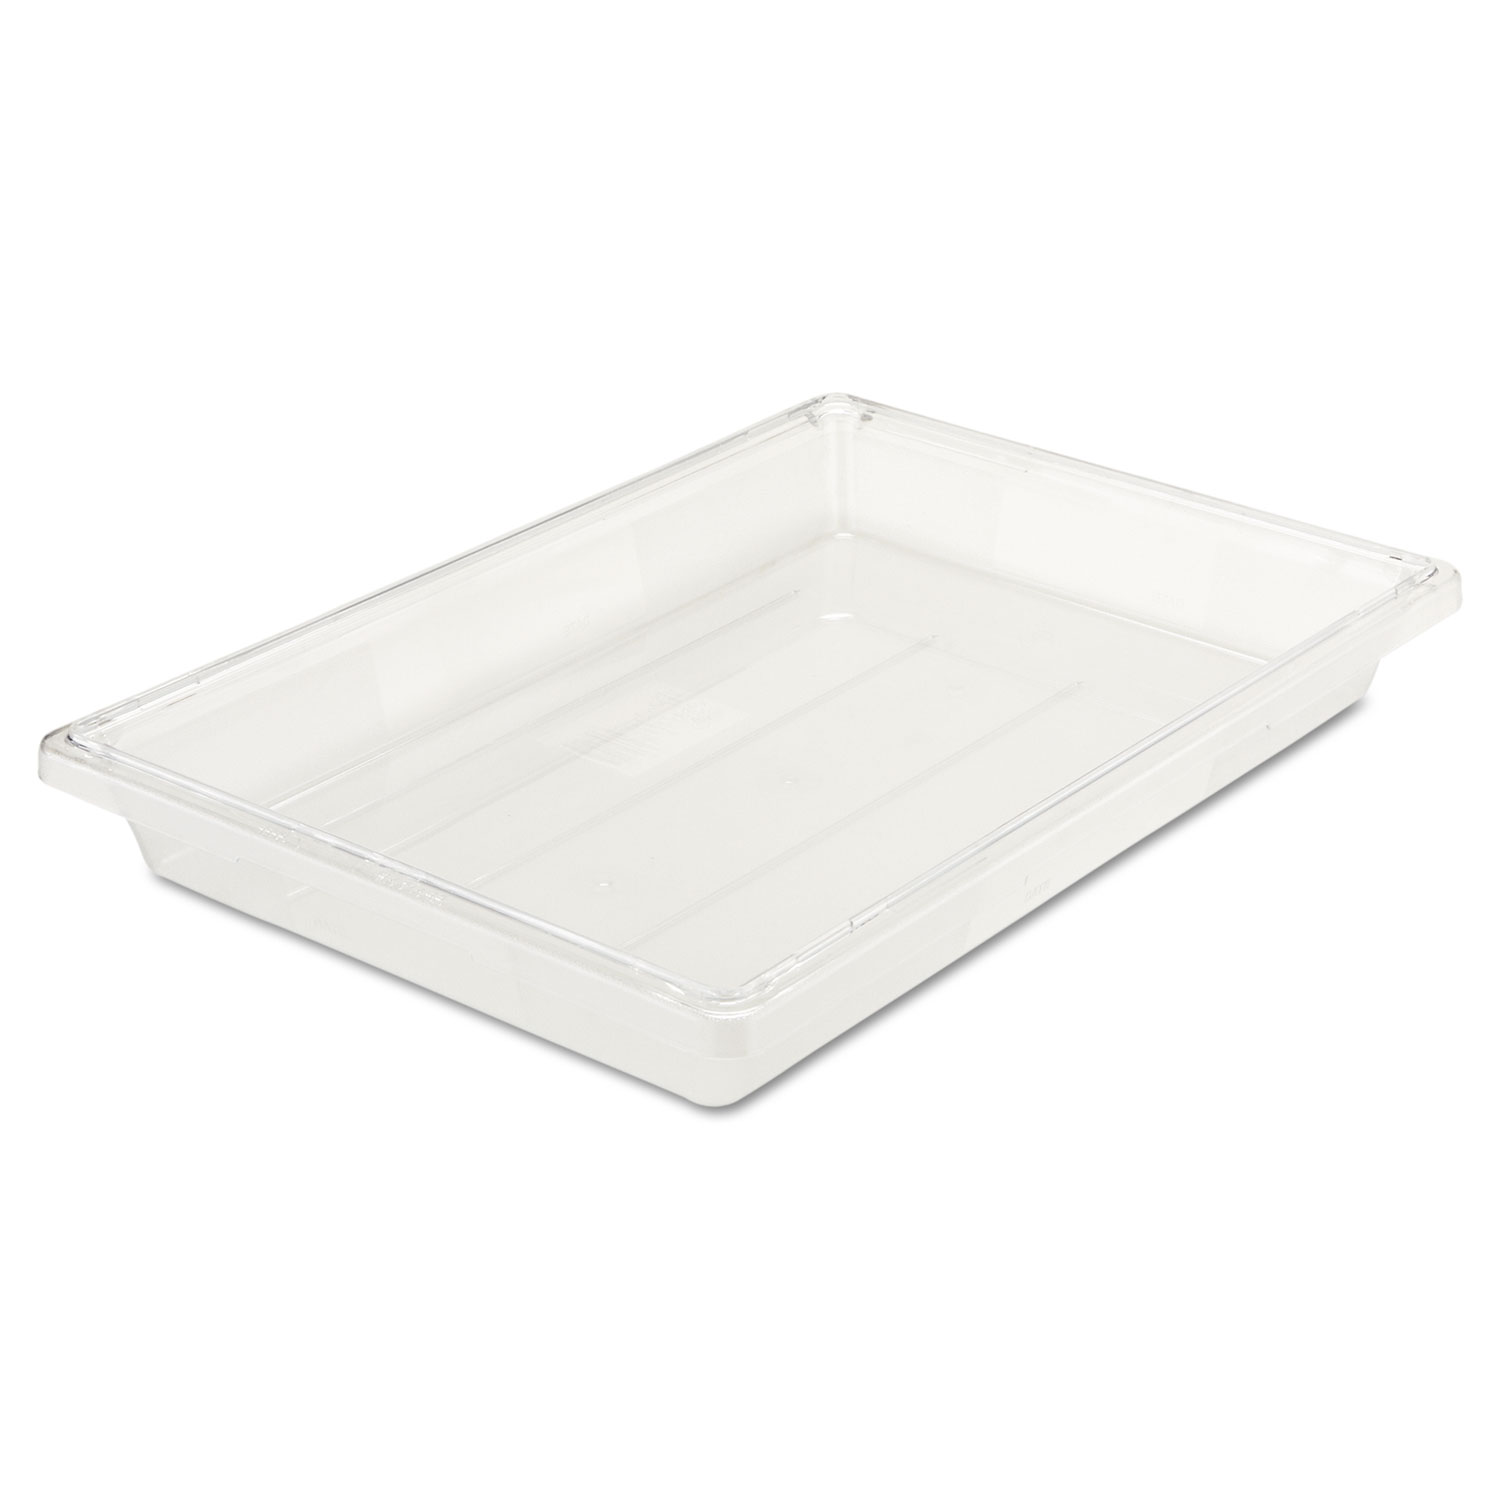  Rubbermaid Commercial 330600CLR Food/Tote Boxes, 5gal, 26w x 18d x 3 1/2h, Clear (RCP3306CLE) 